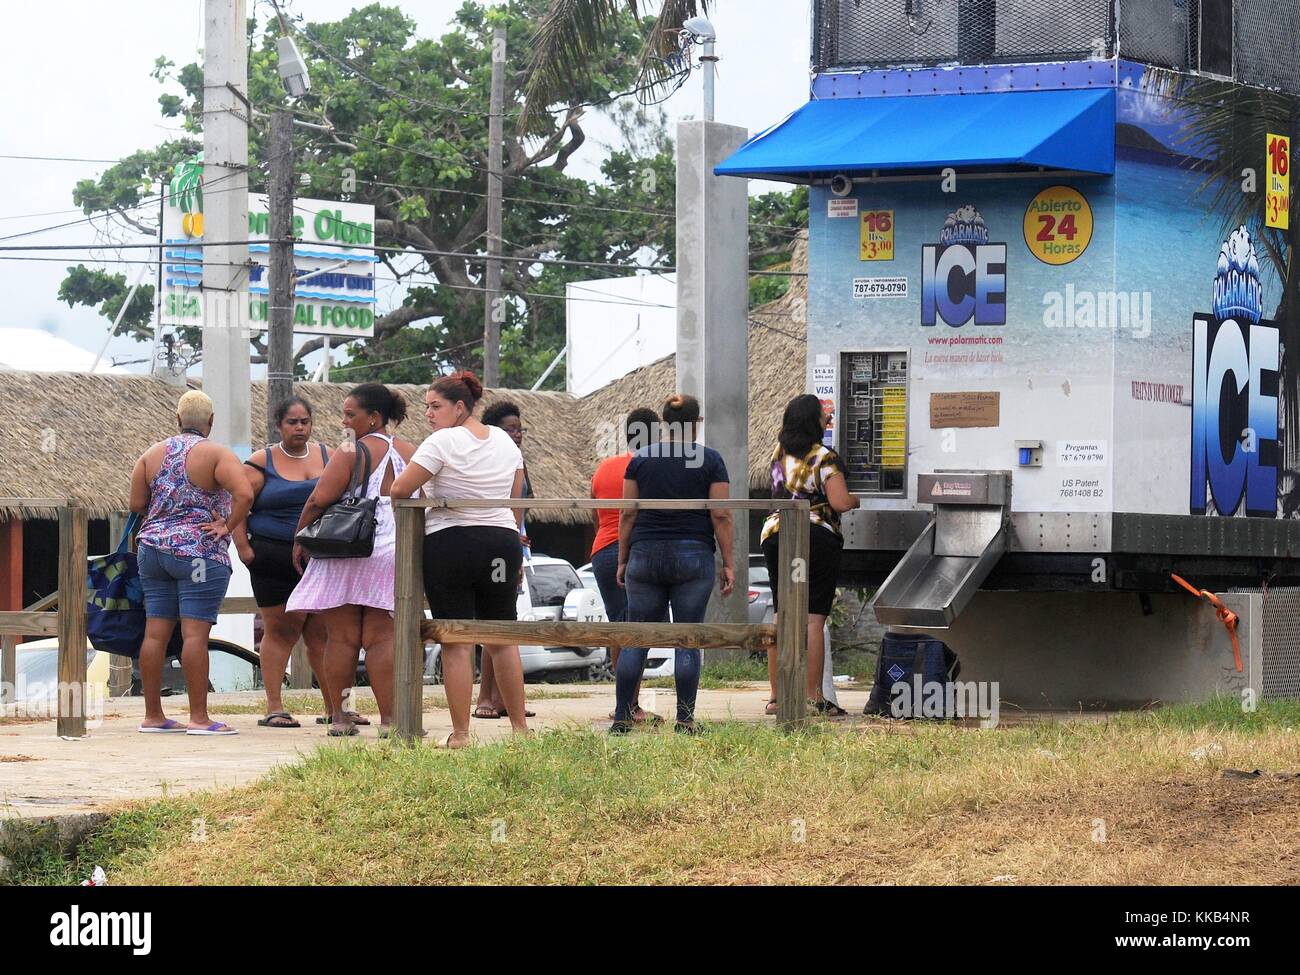 Puerto Rican residents purchase ice from an ice machine in the aftermath of Hurricane Maria November 20, 2017 in Playa Aviones, Loiza, Puerto Rico.  (photo by Steven Shepard via Planetpix) Stock Photo